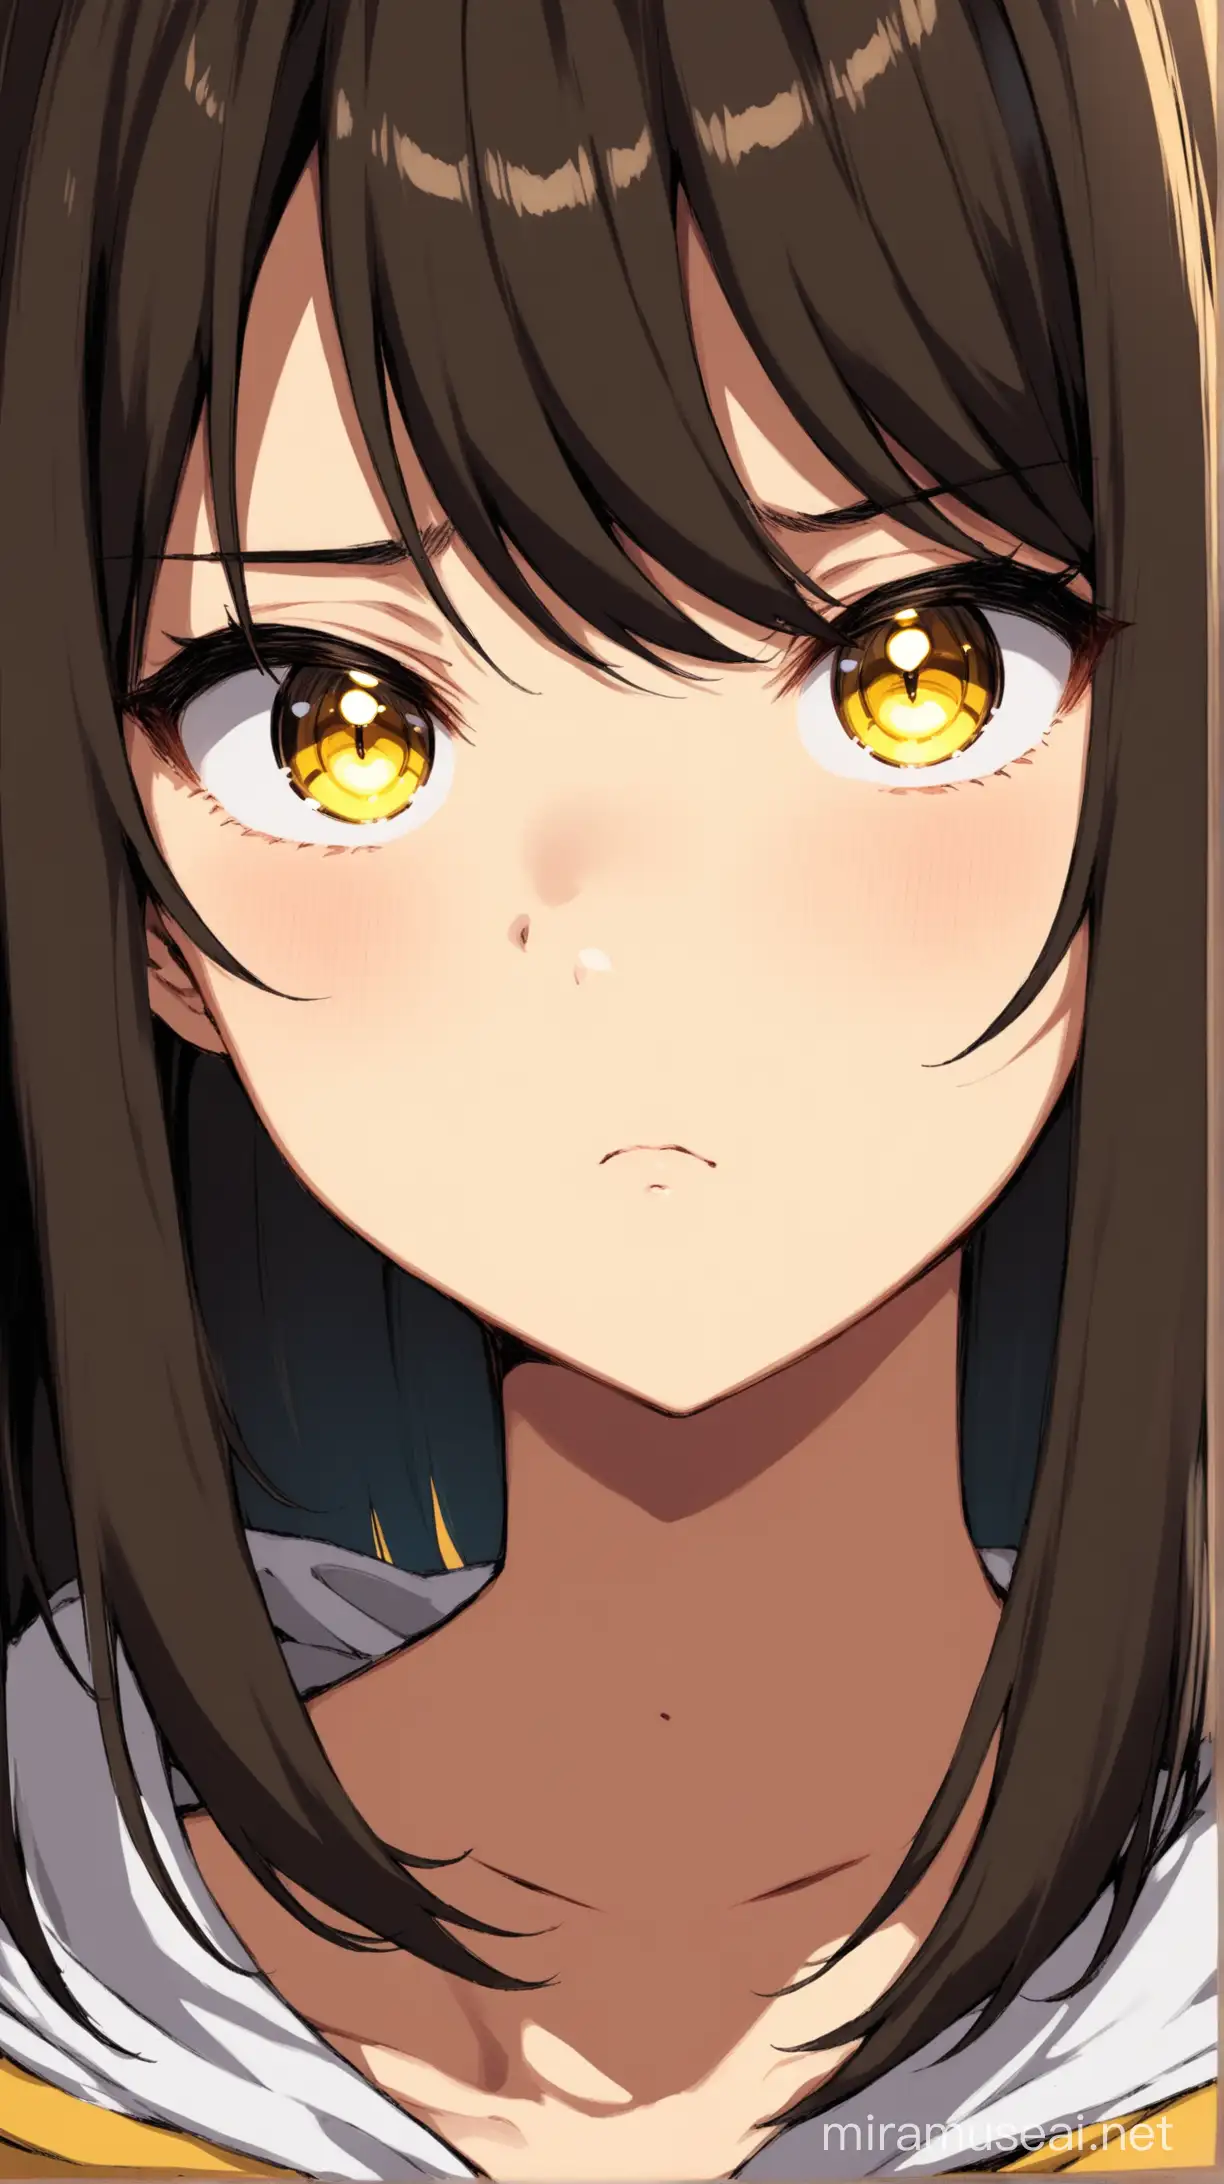 Nemuidere brunette anime girl with a tired face expression, yellow eyes with black pupils, hair semi-covers the eyes, medium length hair.